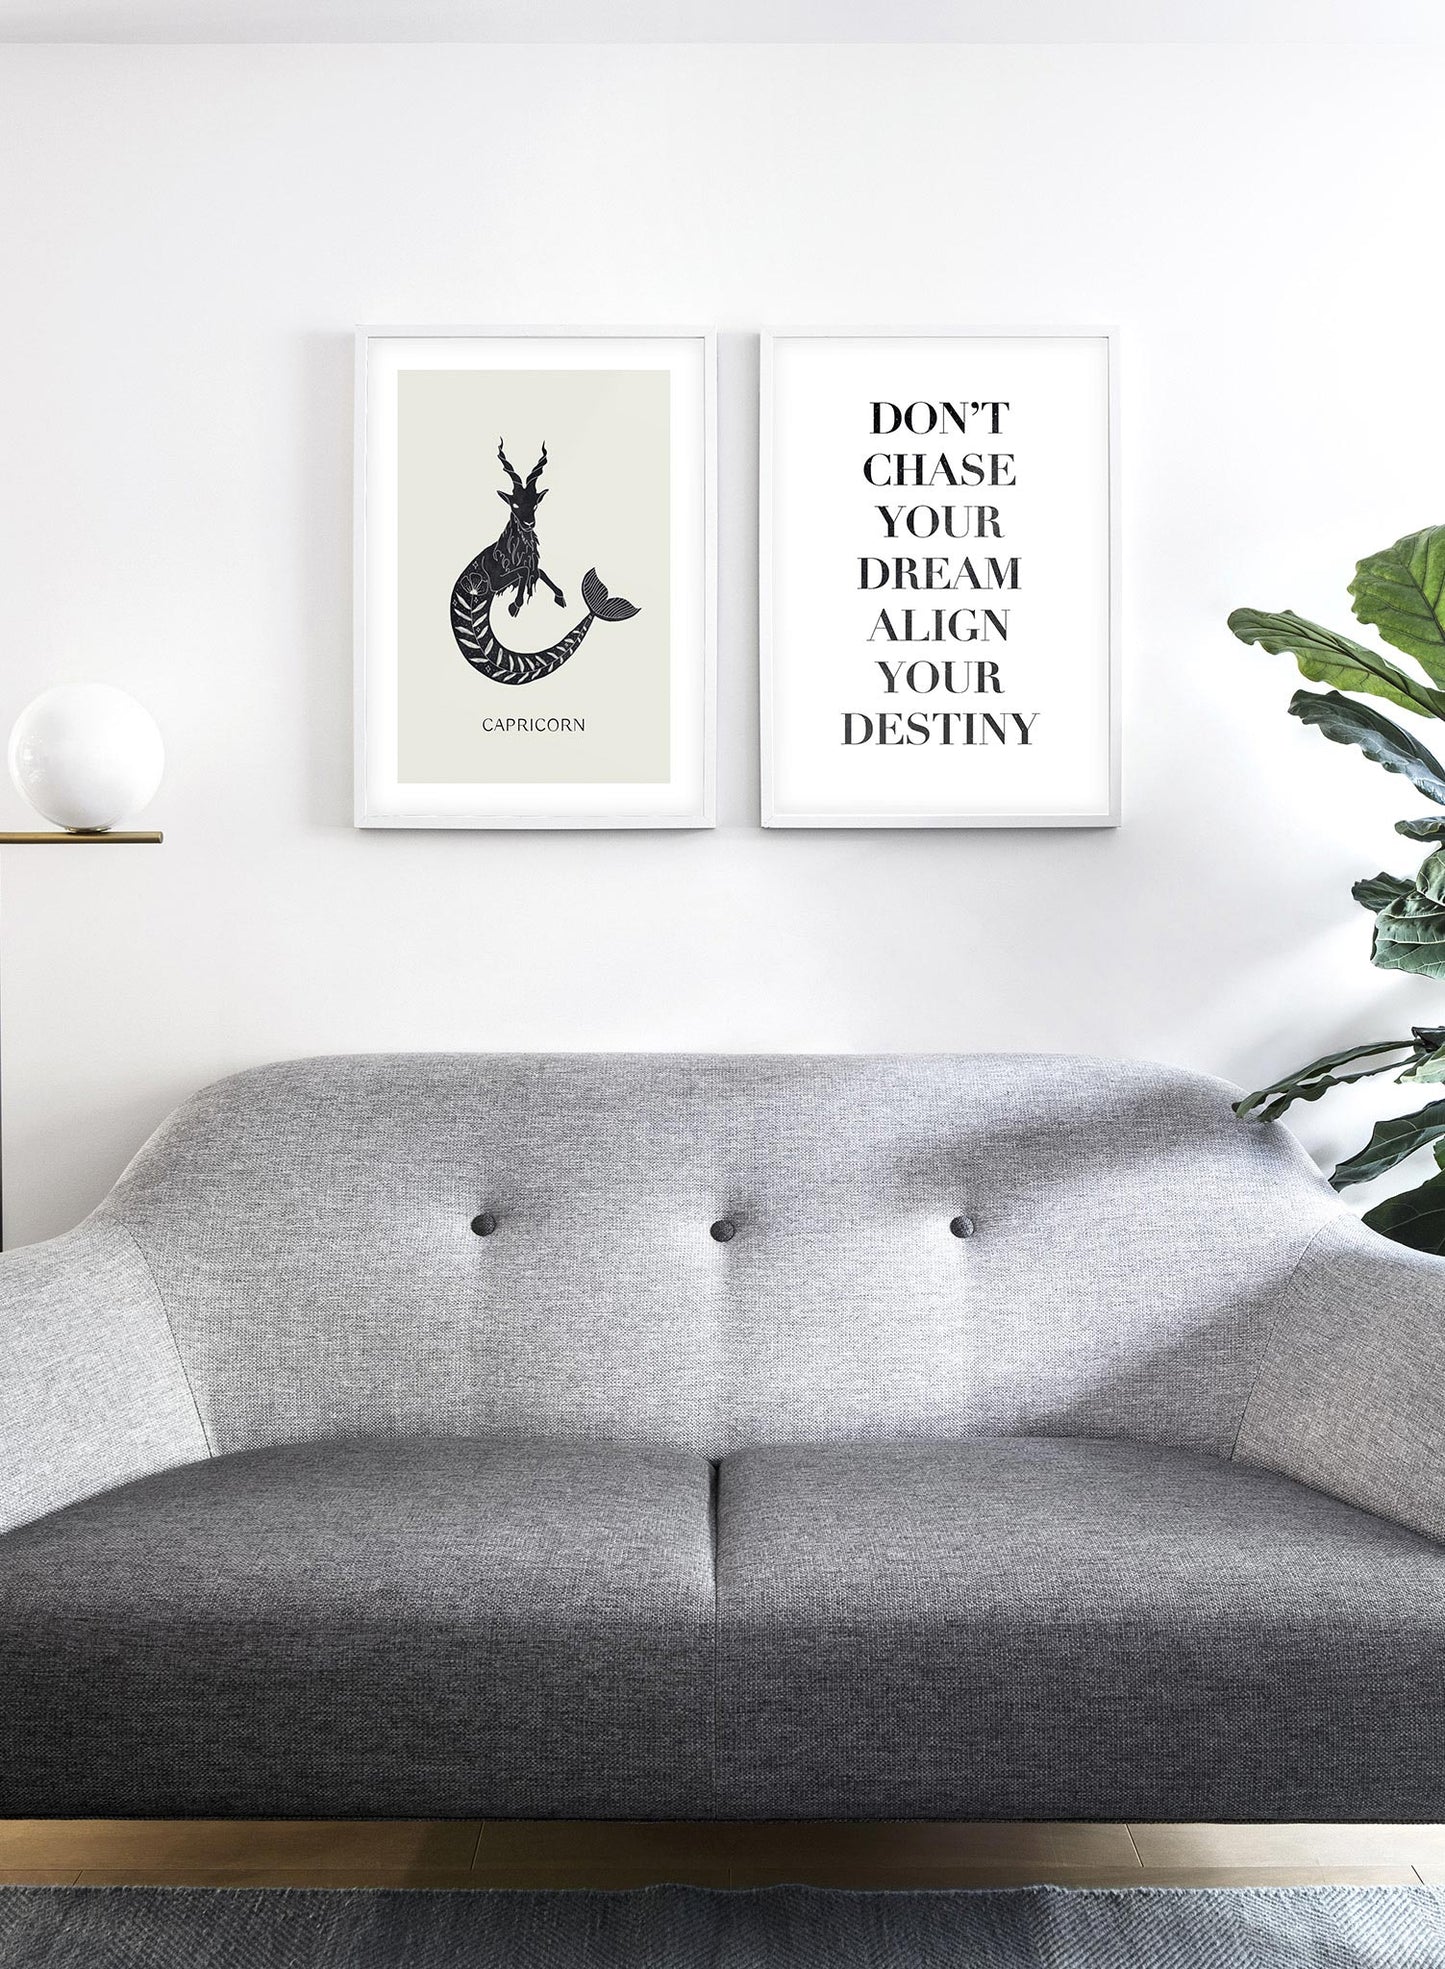 Celestial illustration poster by Opposite Wall with horoscope zodiac symbol of Capricorn - Lifestyle Duo - Living Room